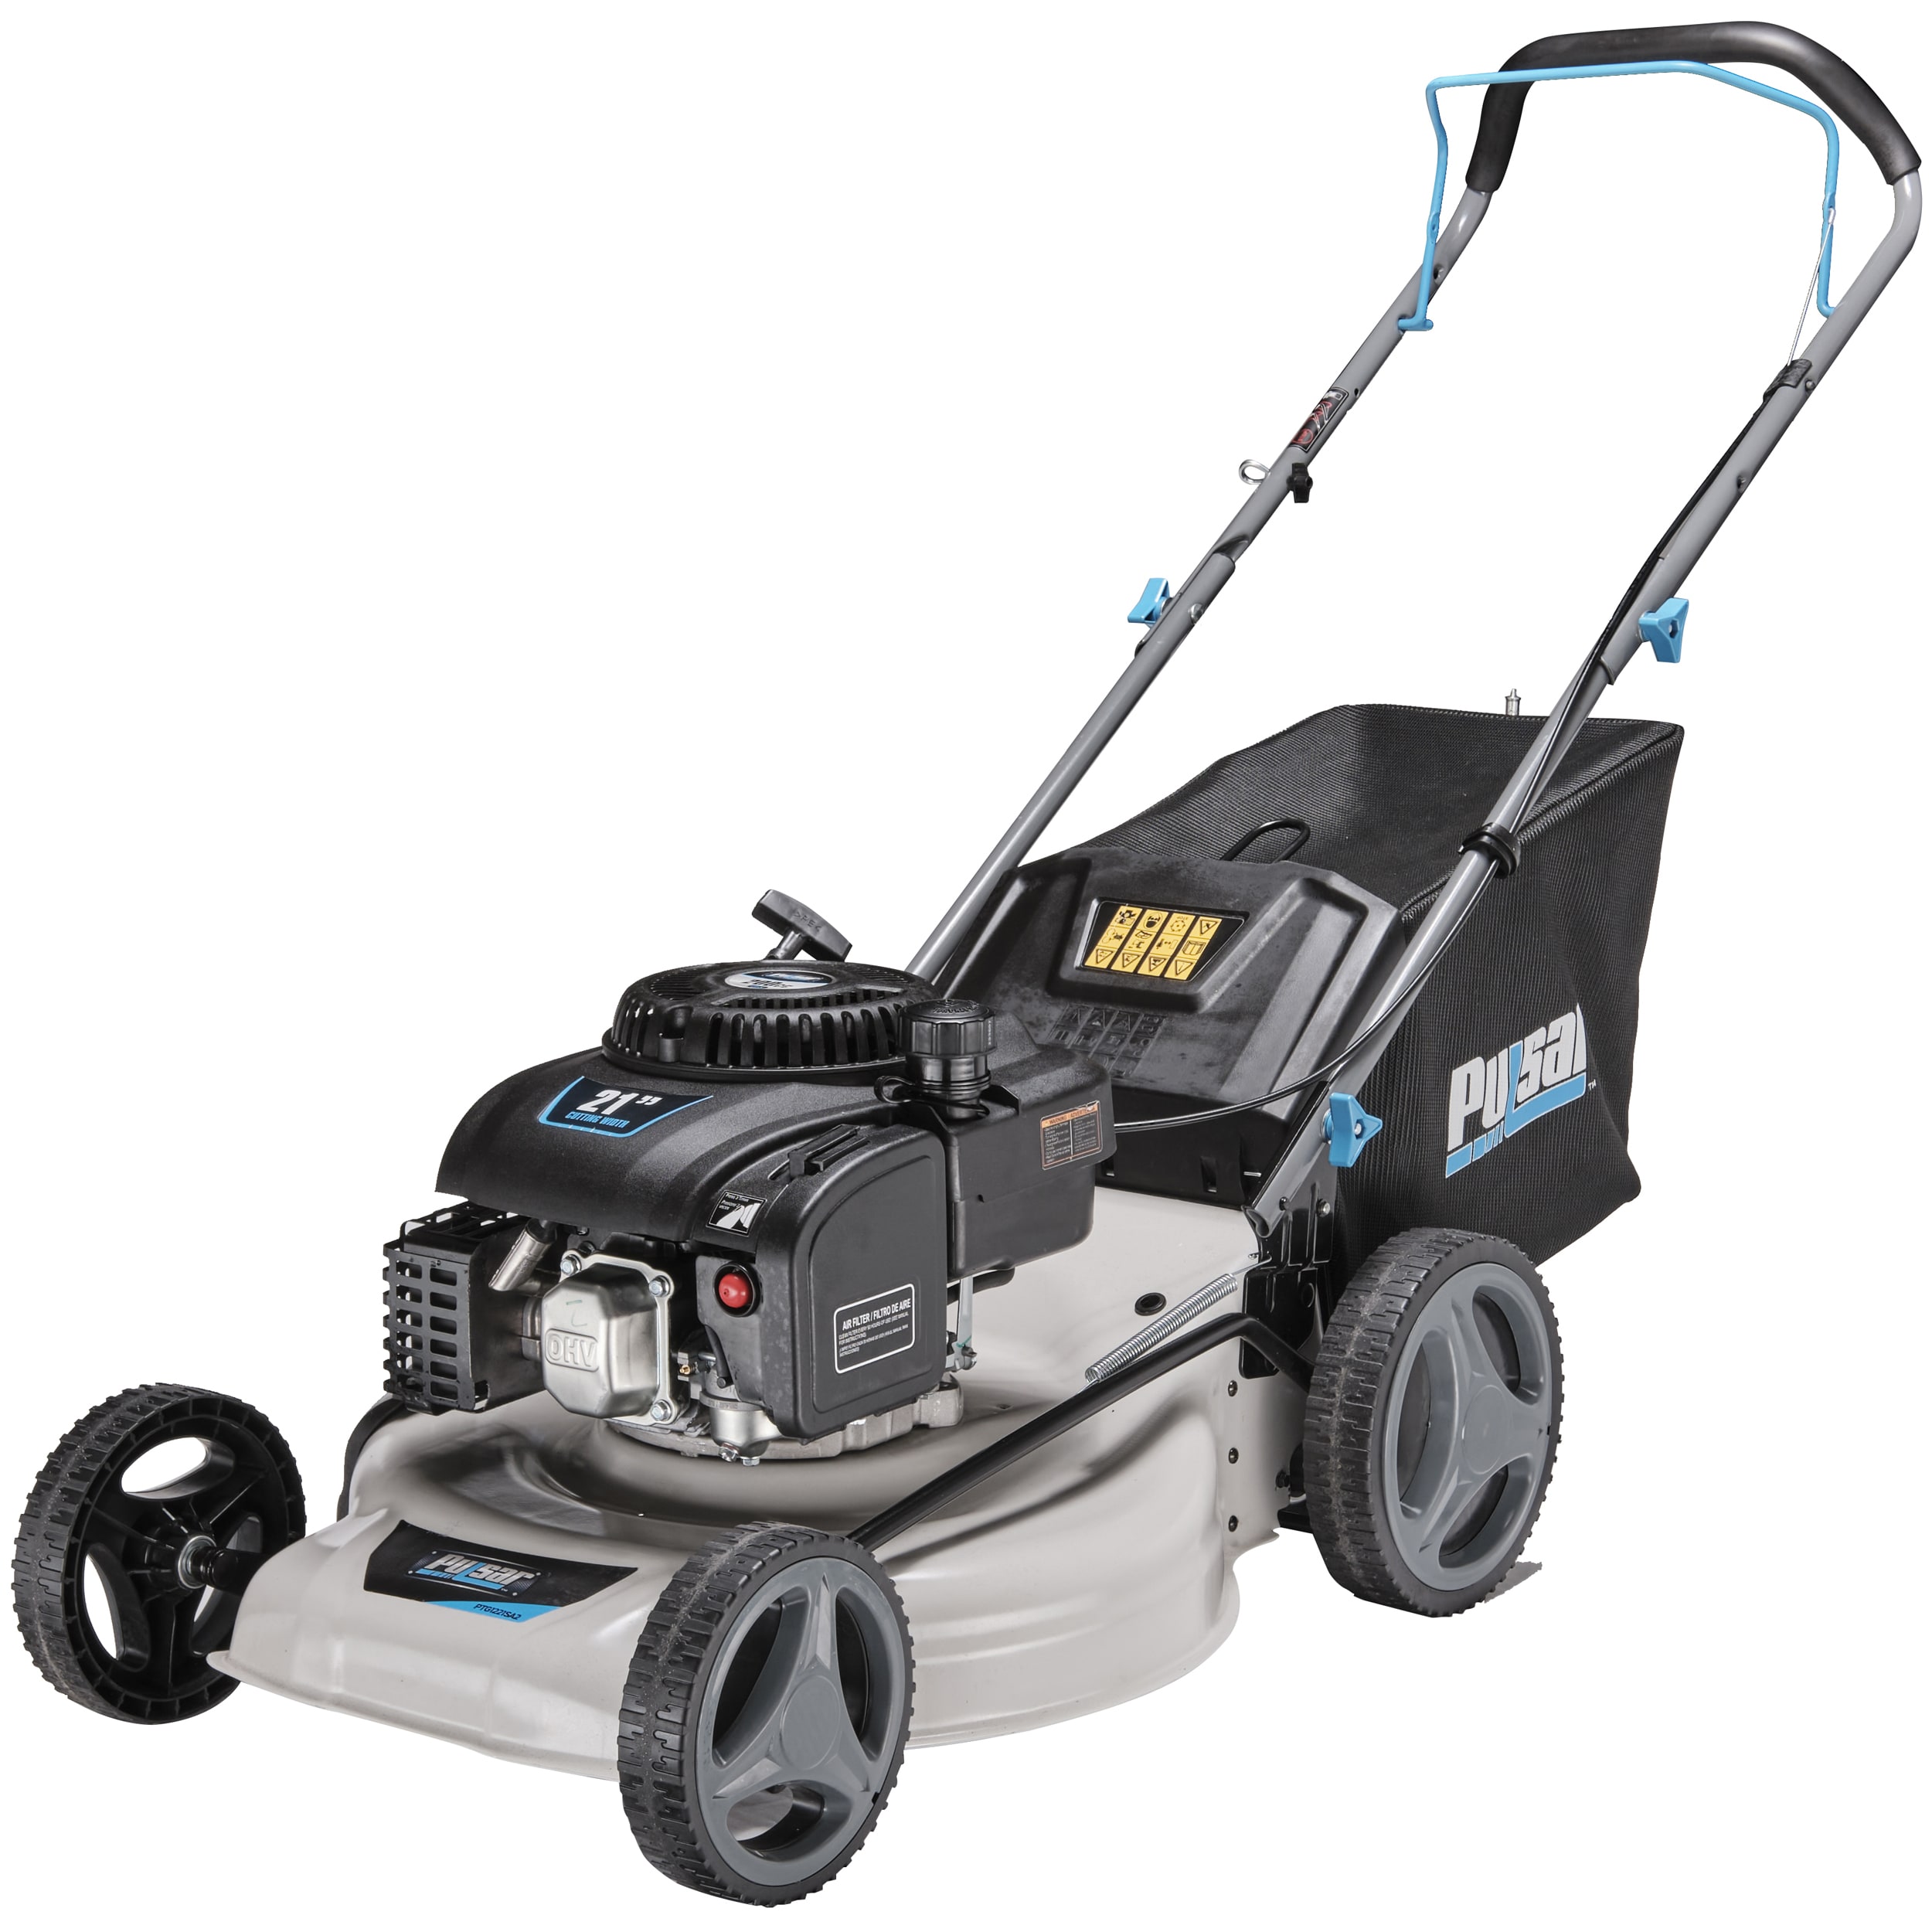 Pulsar Products Lawn Mowers at